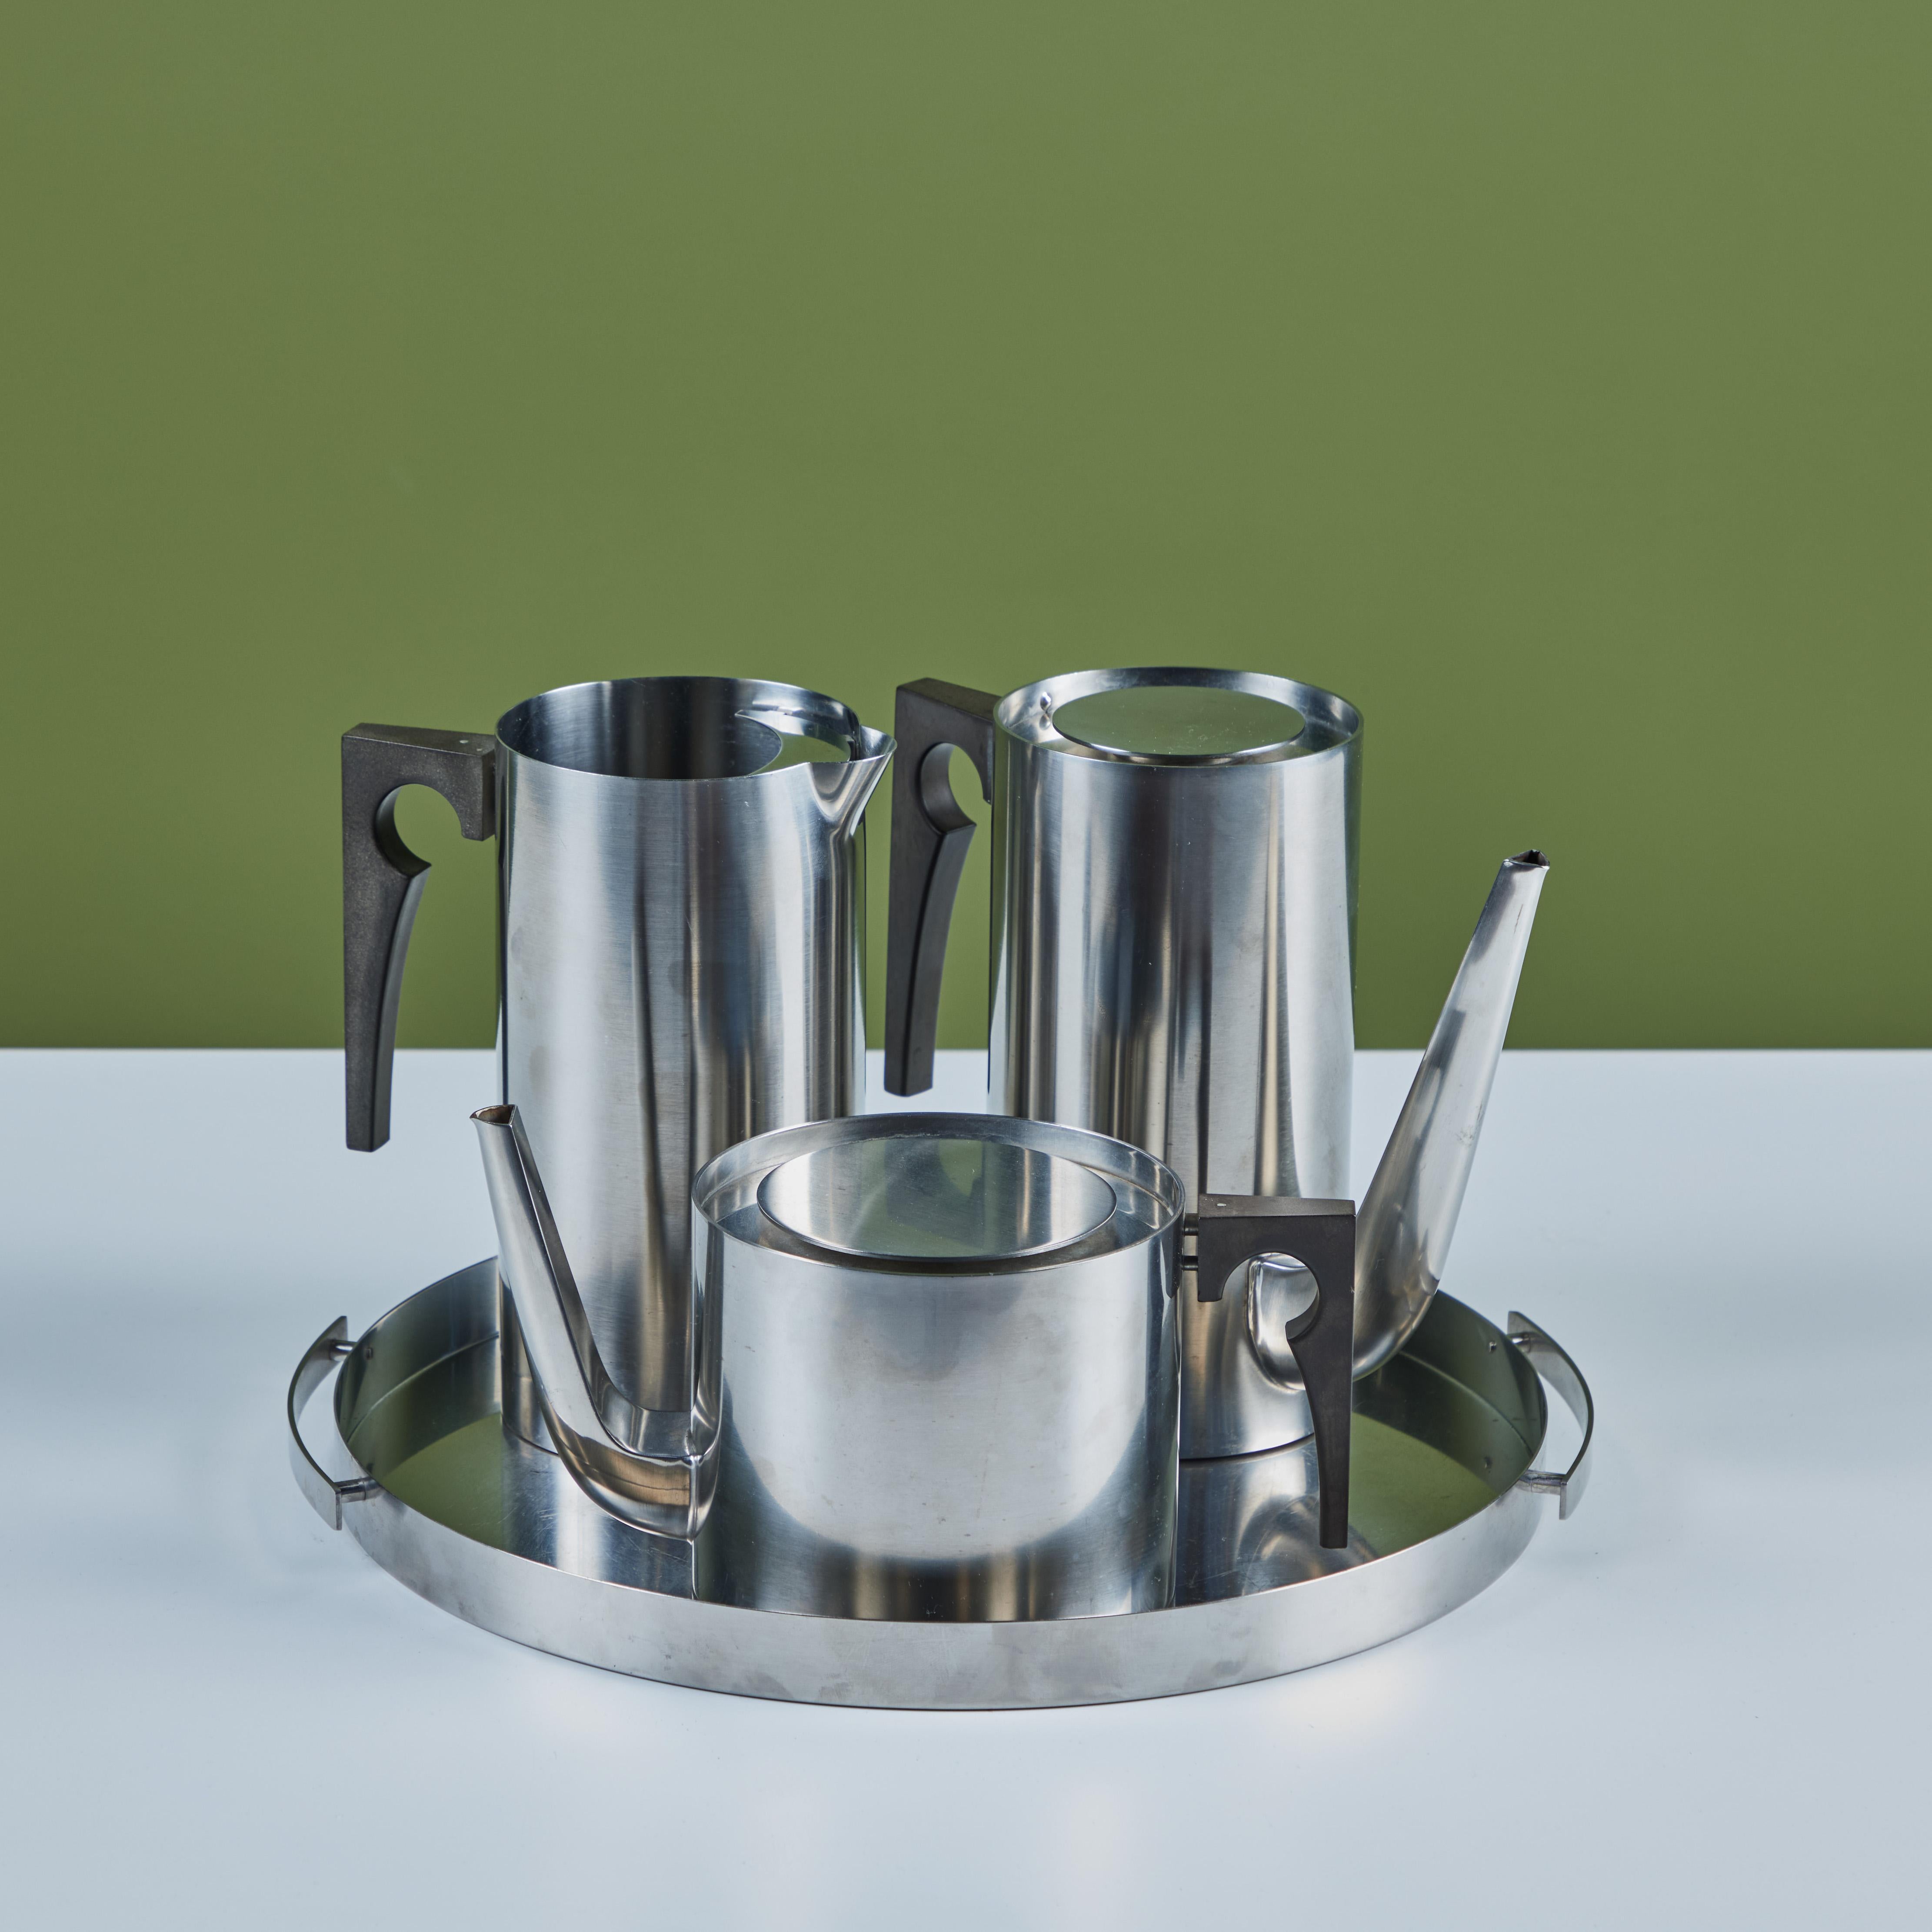 Arne Jacobsen Four Piece Stainless Steel Danish Coffee/Tea Set for Stelton In Good Condition For Sale In Los Angeles, CA